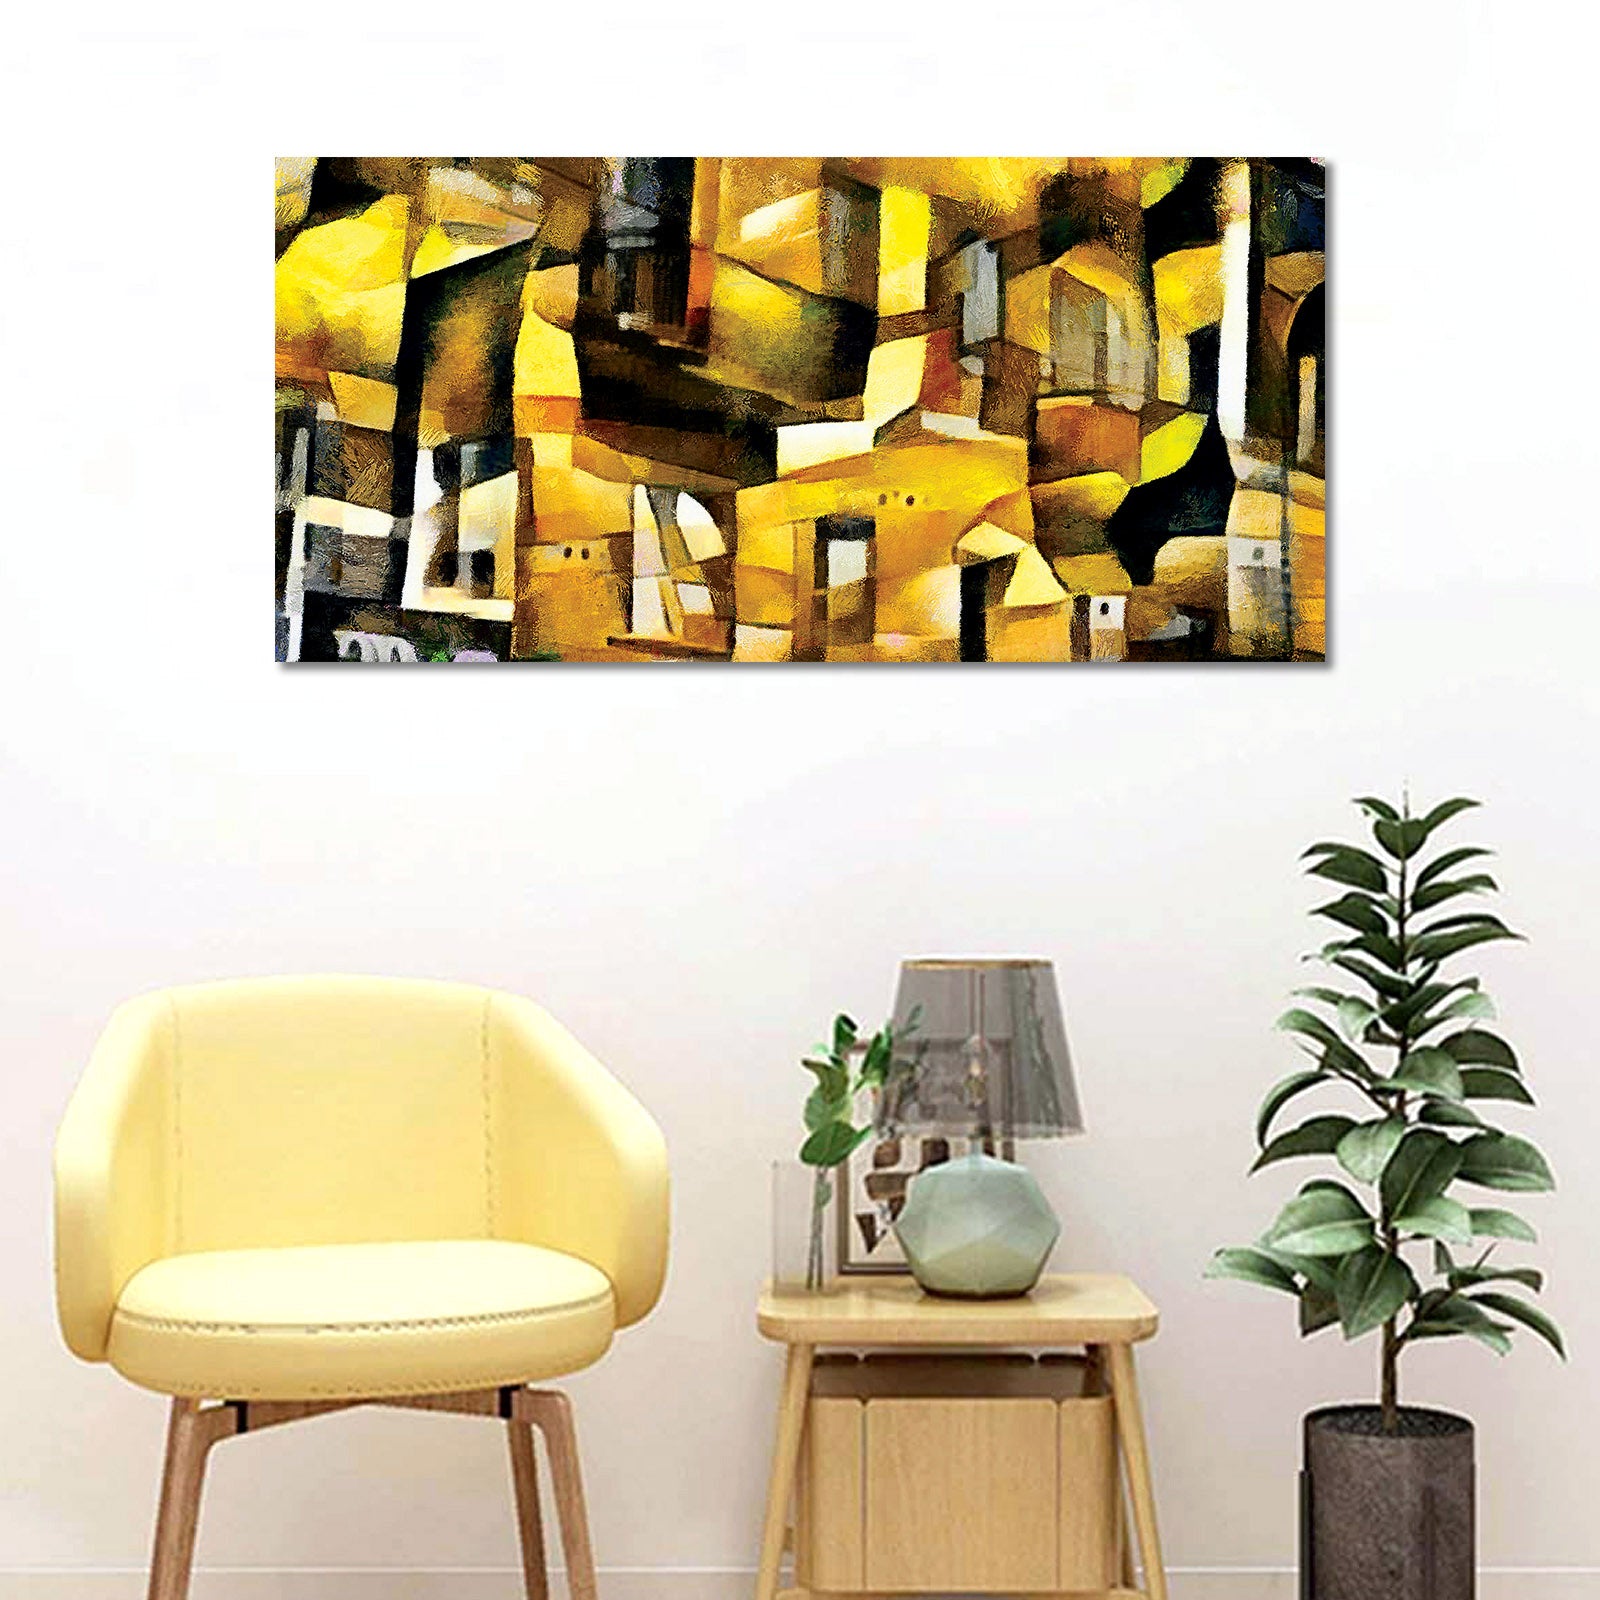 Urban architecture - Unframed Canvas Painting